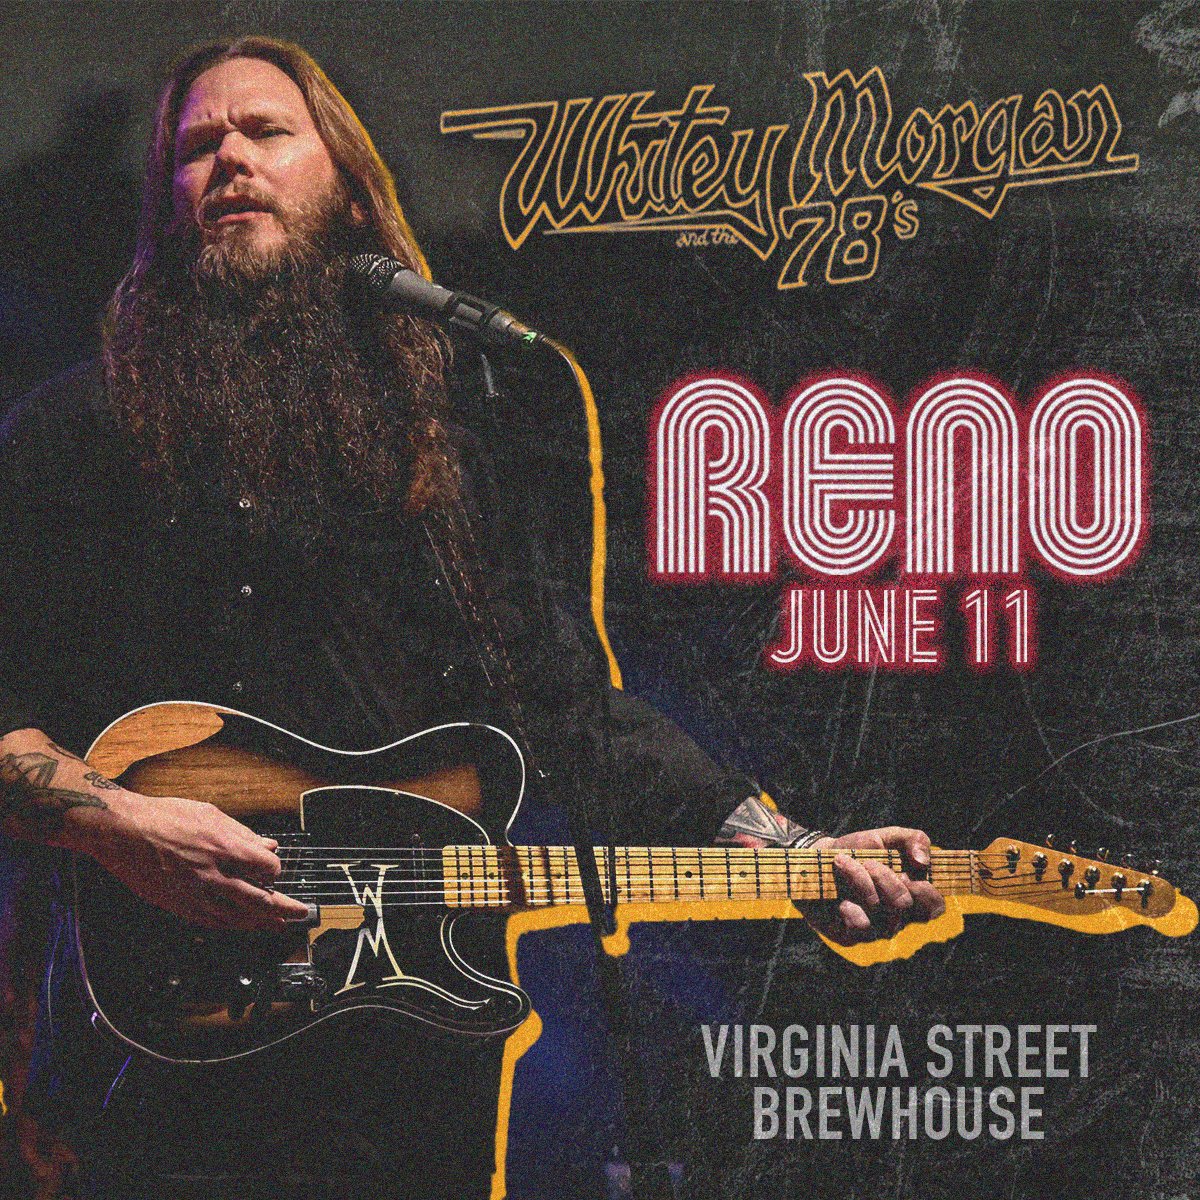 Its about time we got back to Reno!! Looking forward to seeing some familiar faces. Lets get rowdy. Tickets go on sale next Friday at 10 AM local. ticketweb.com/event/whitey-m…